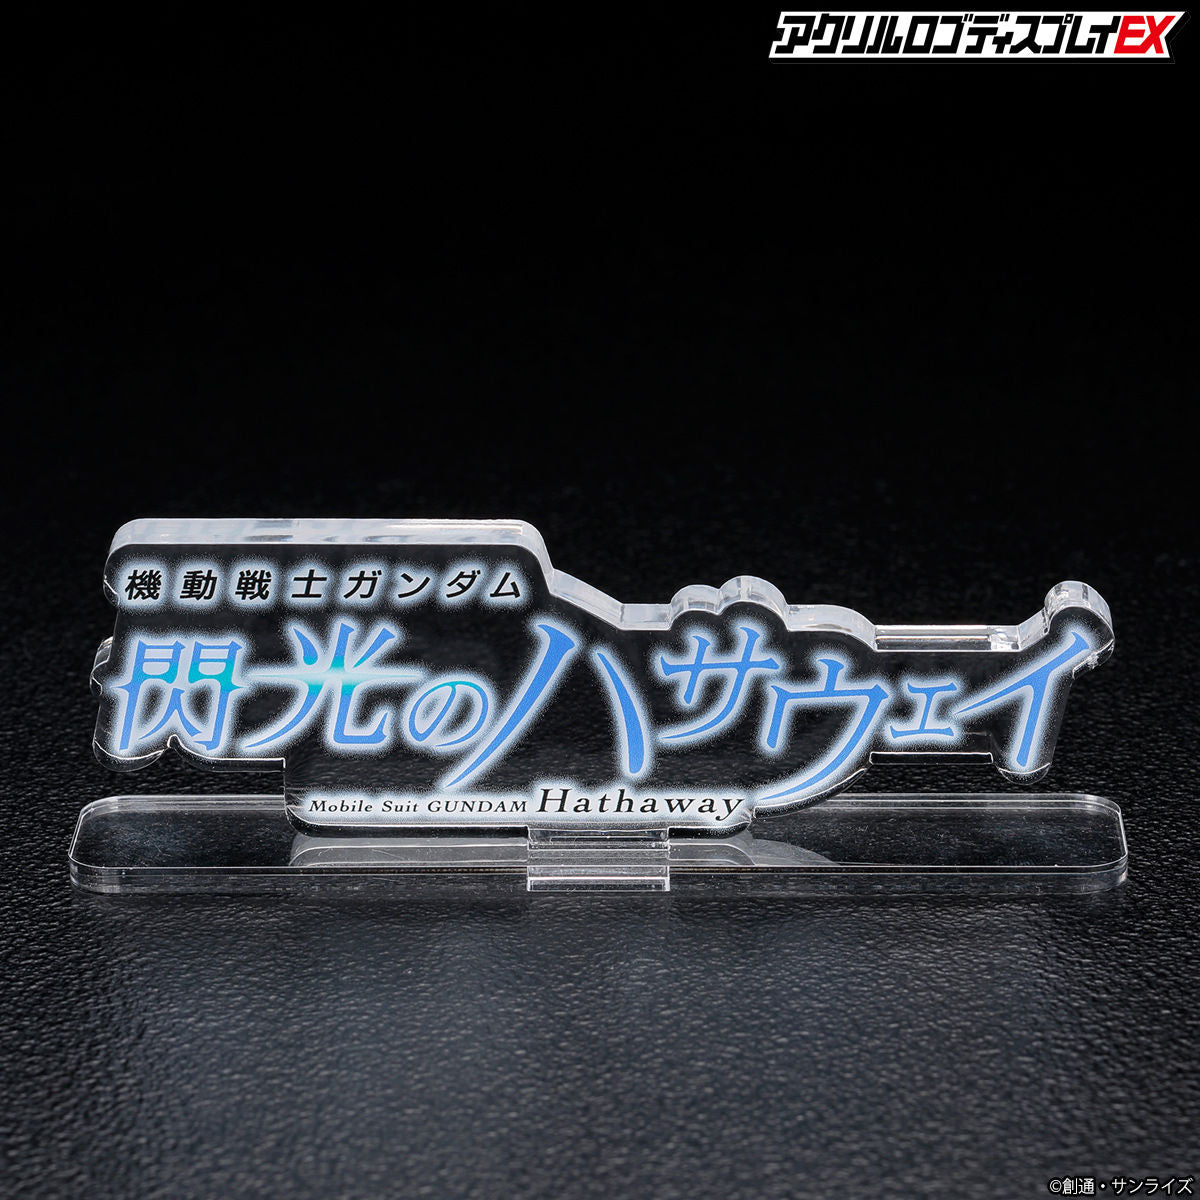 [PREORDER] Big Size of Acrylic Logo Display EX Mobile Suit Gundam Hathaway in Transparent Background